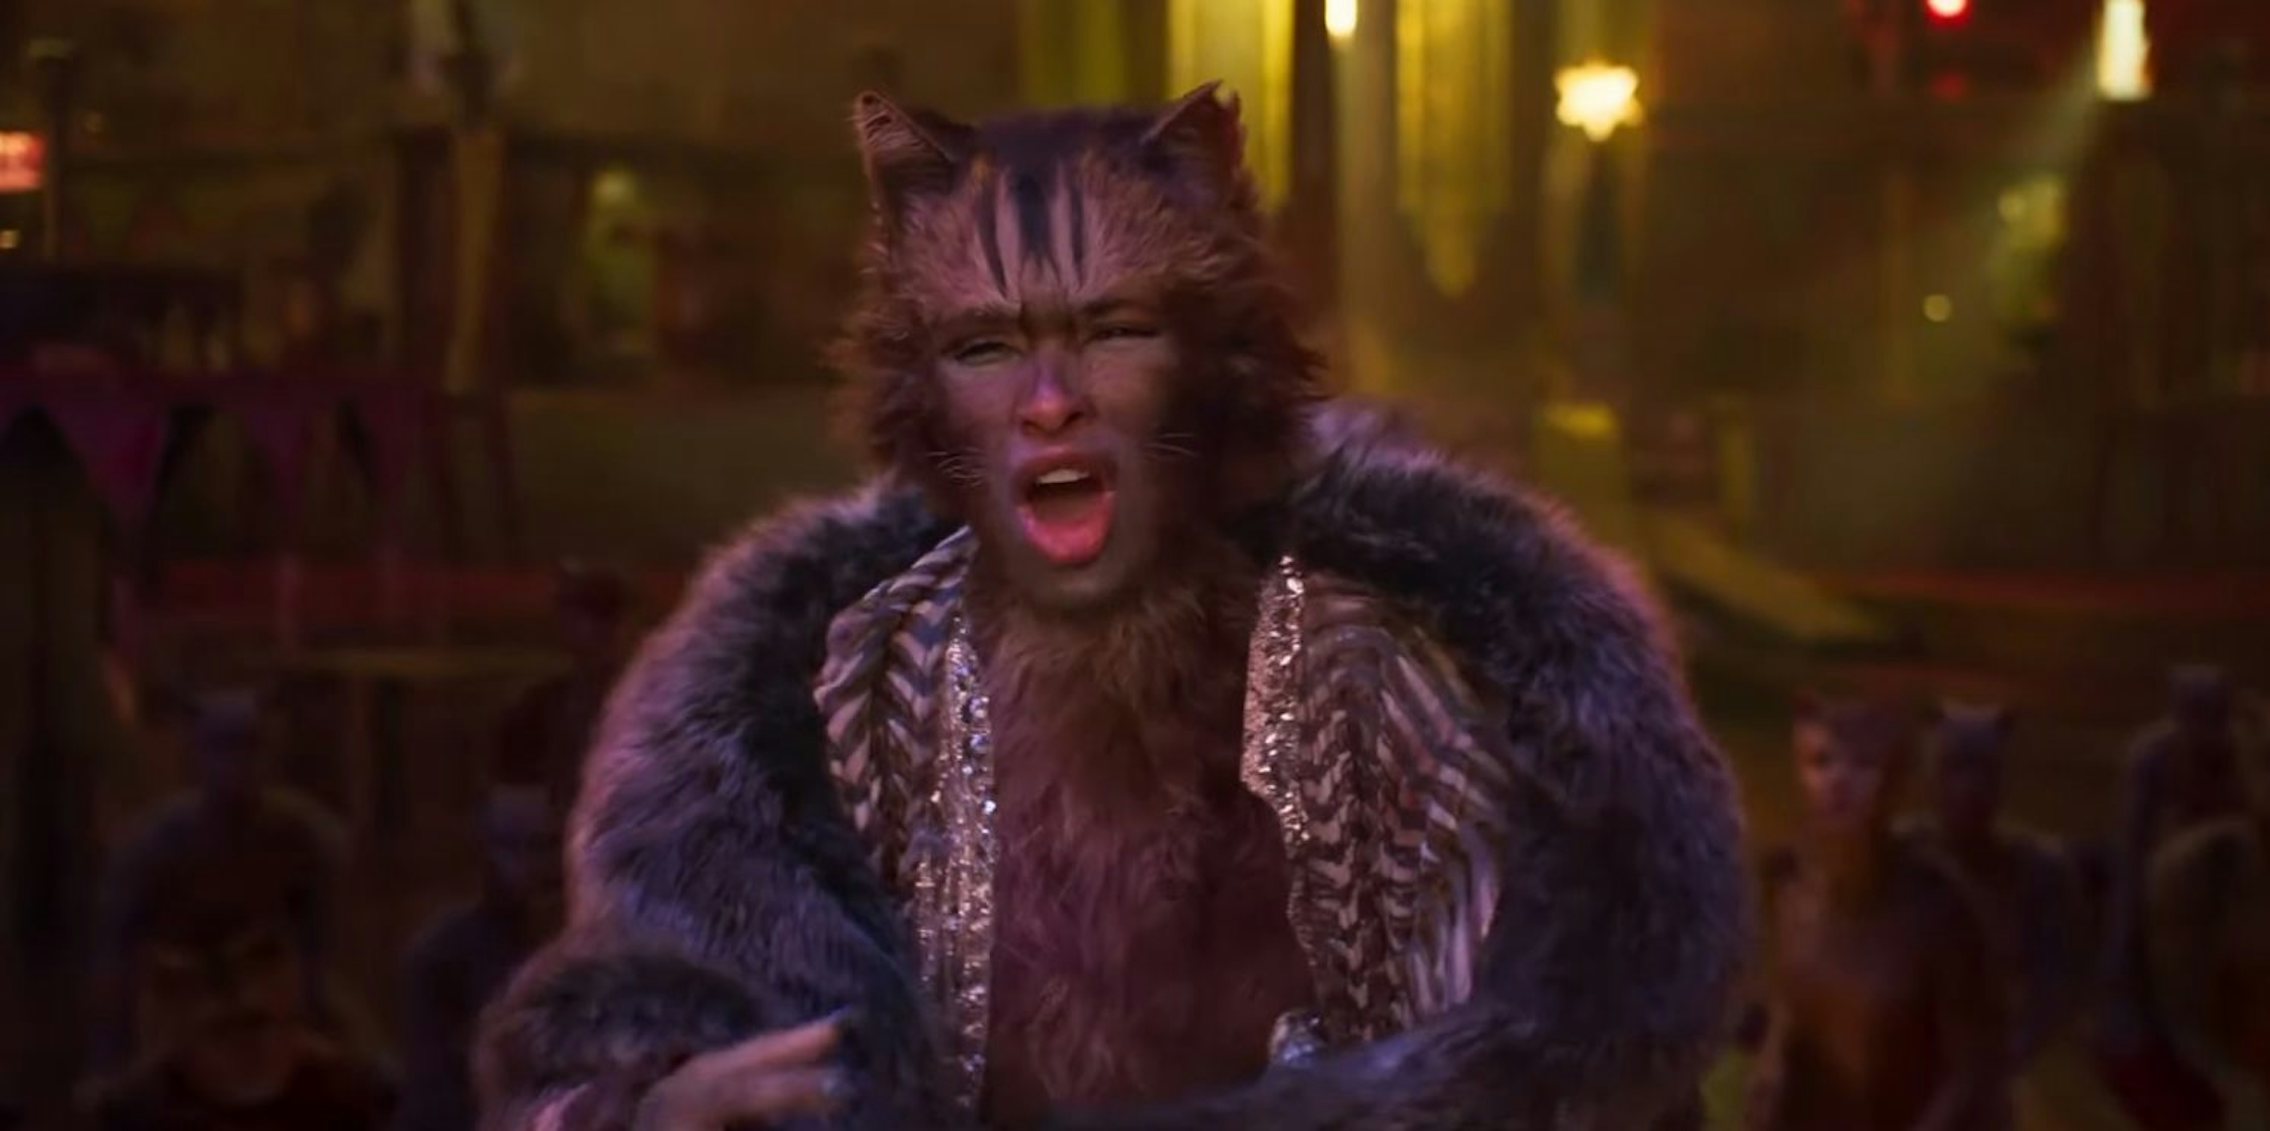 CATS Trailer 2 (2019) 